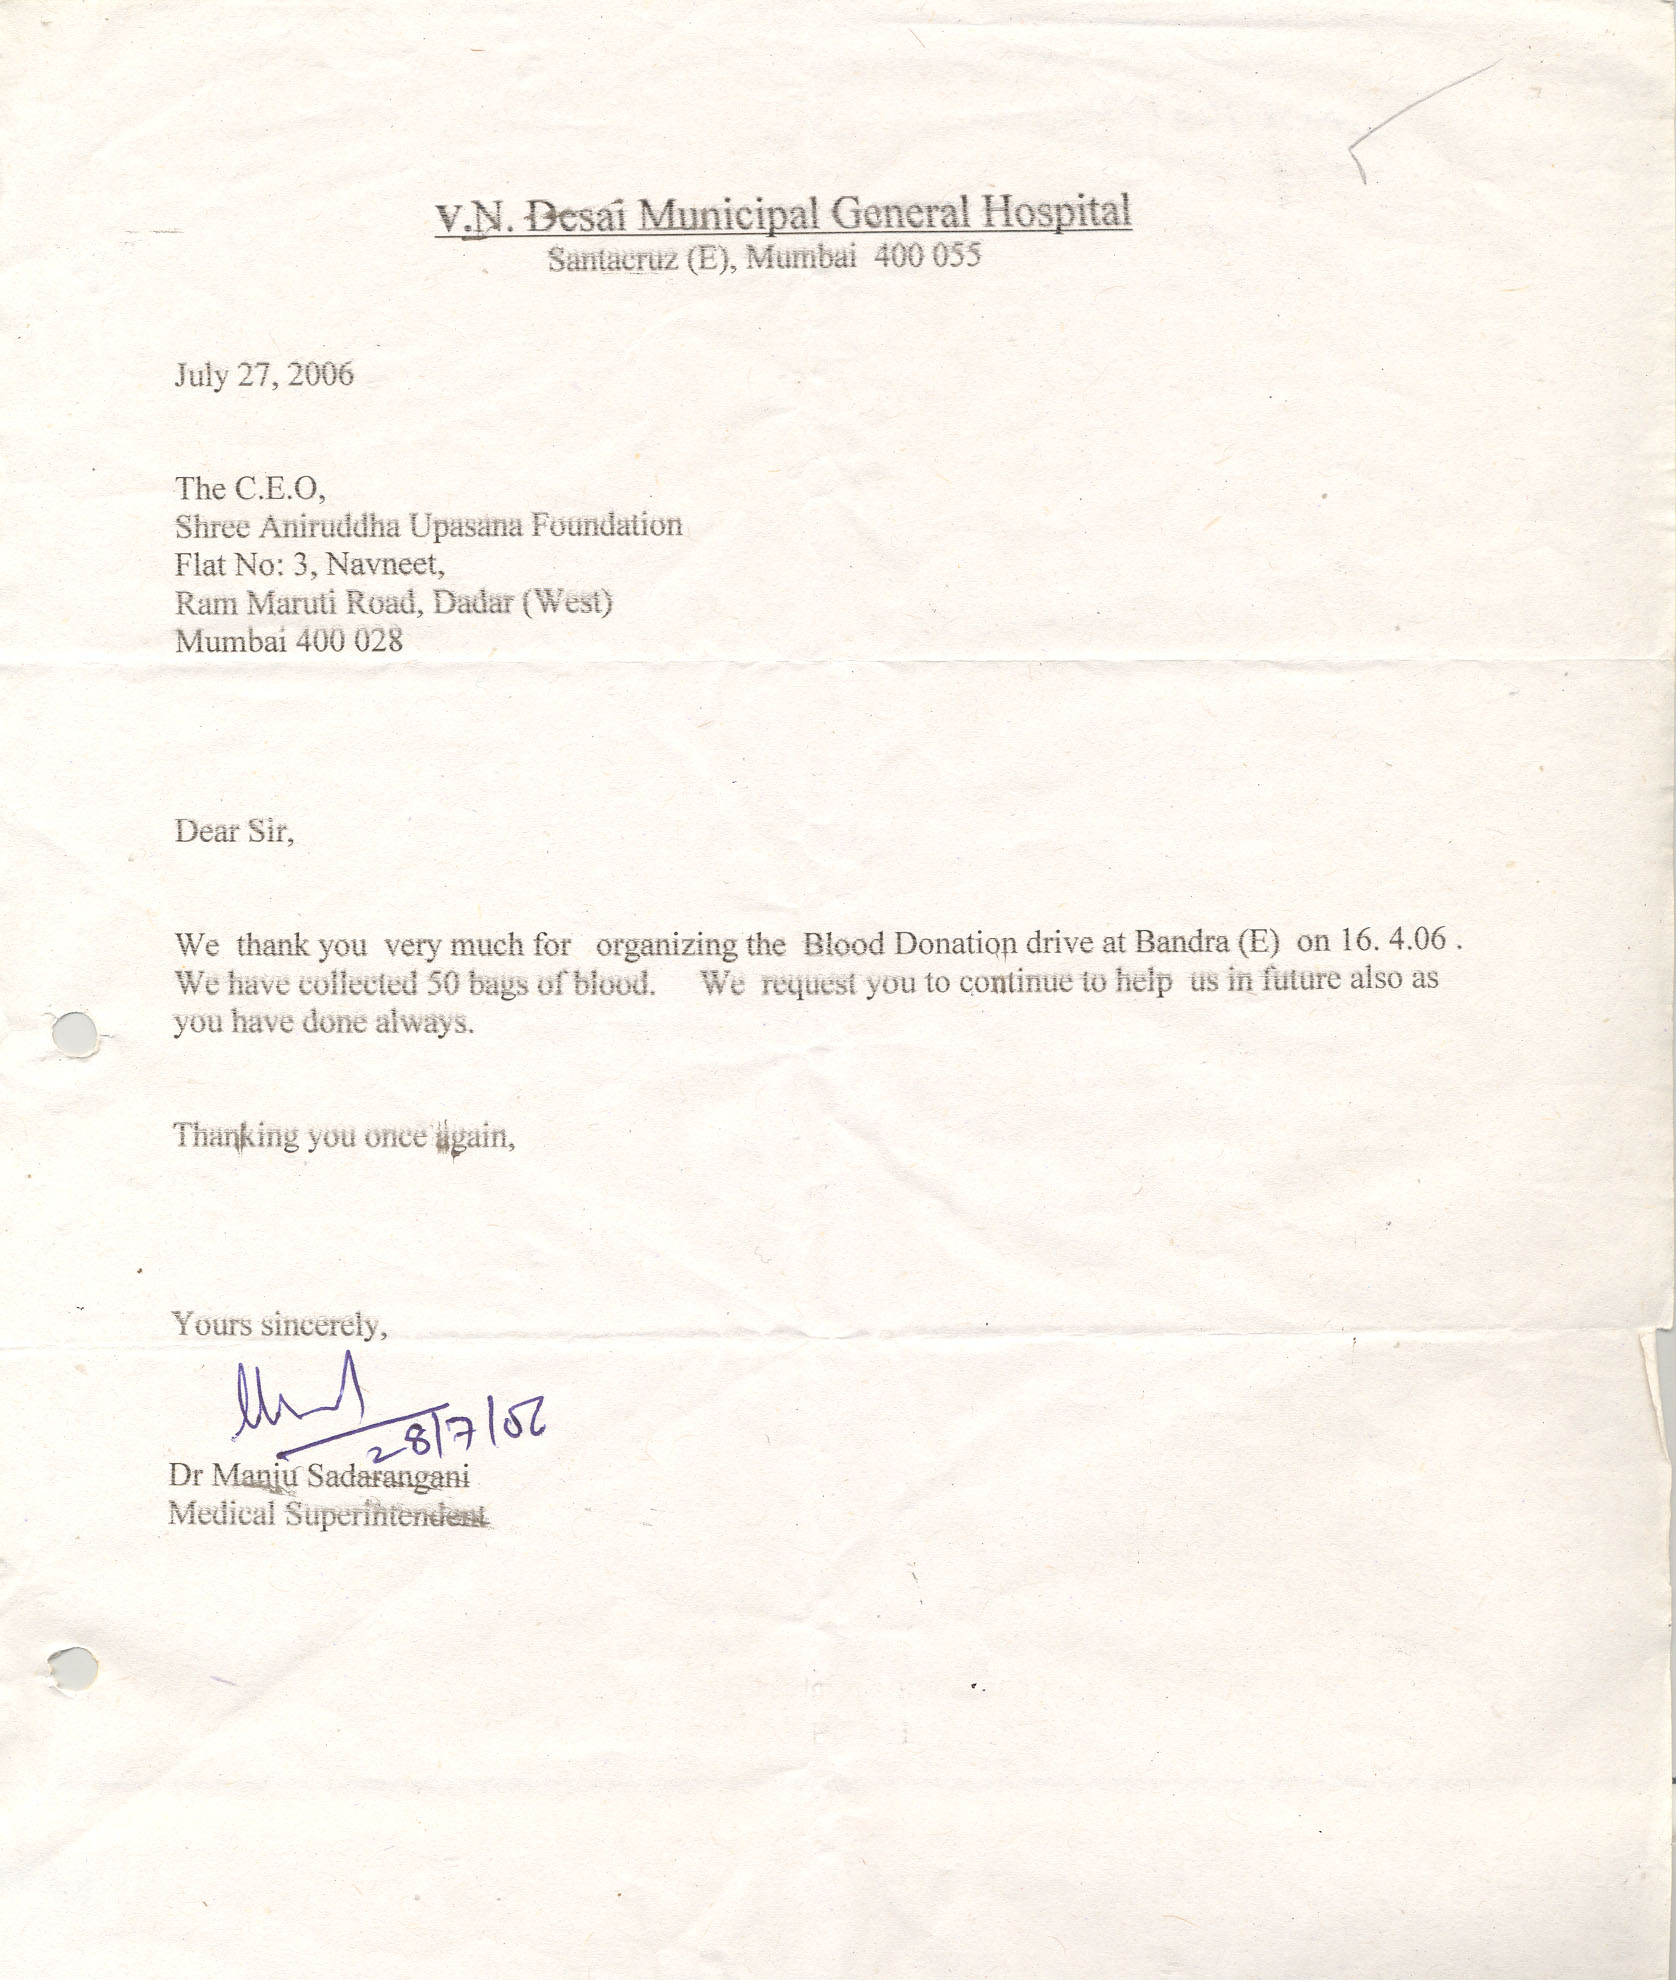 Appreciation-Letter from VN Desai Hospital 2006 -for-Aniruddhafoundation-Compassion-Social-services